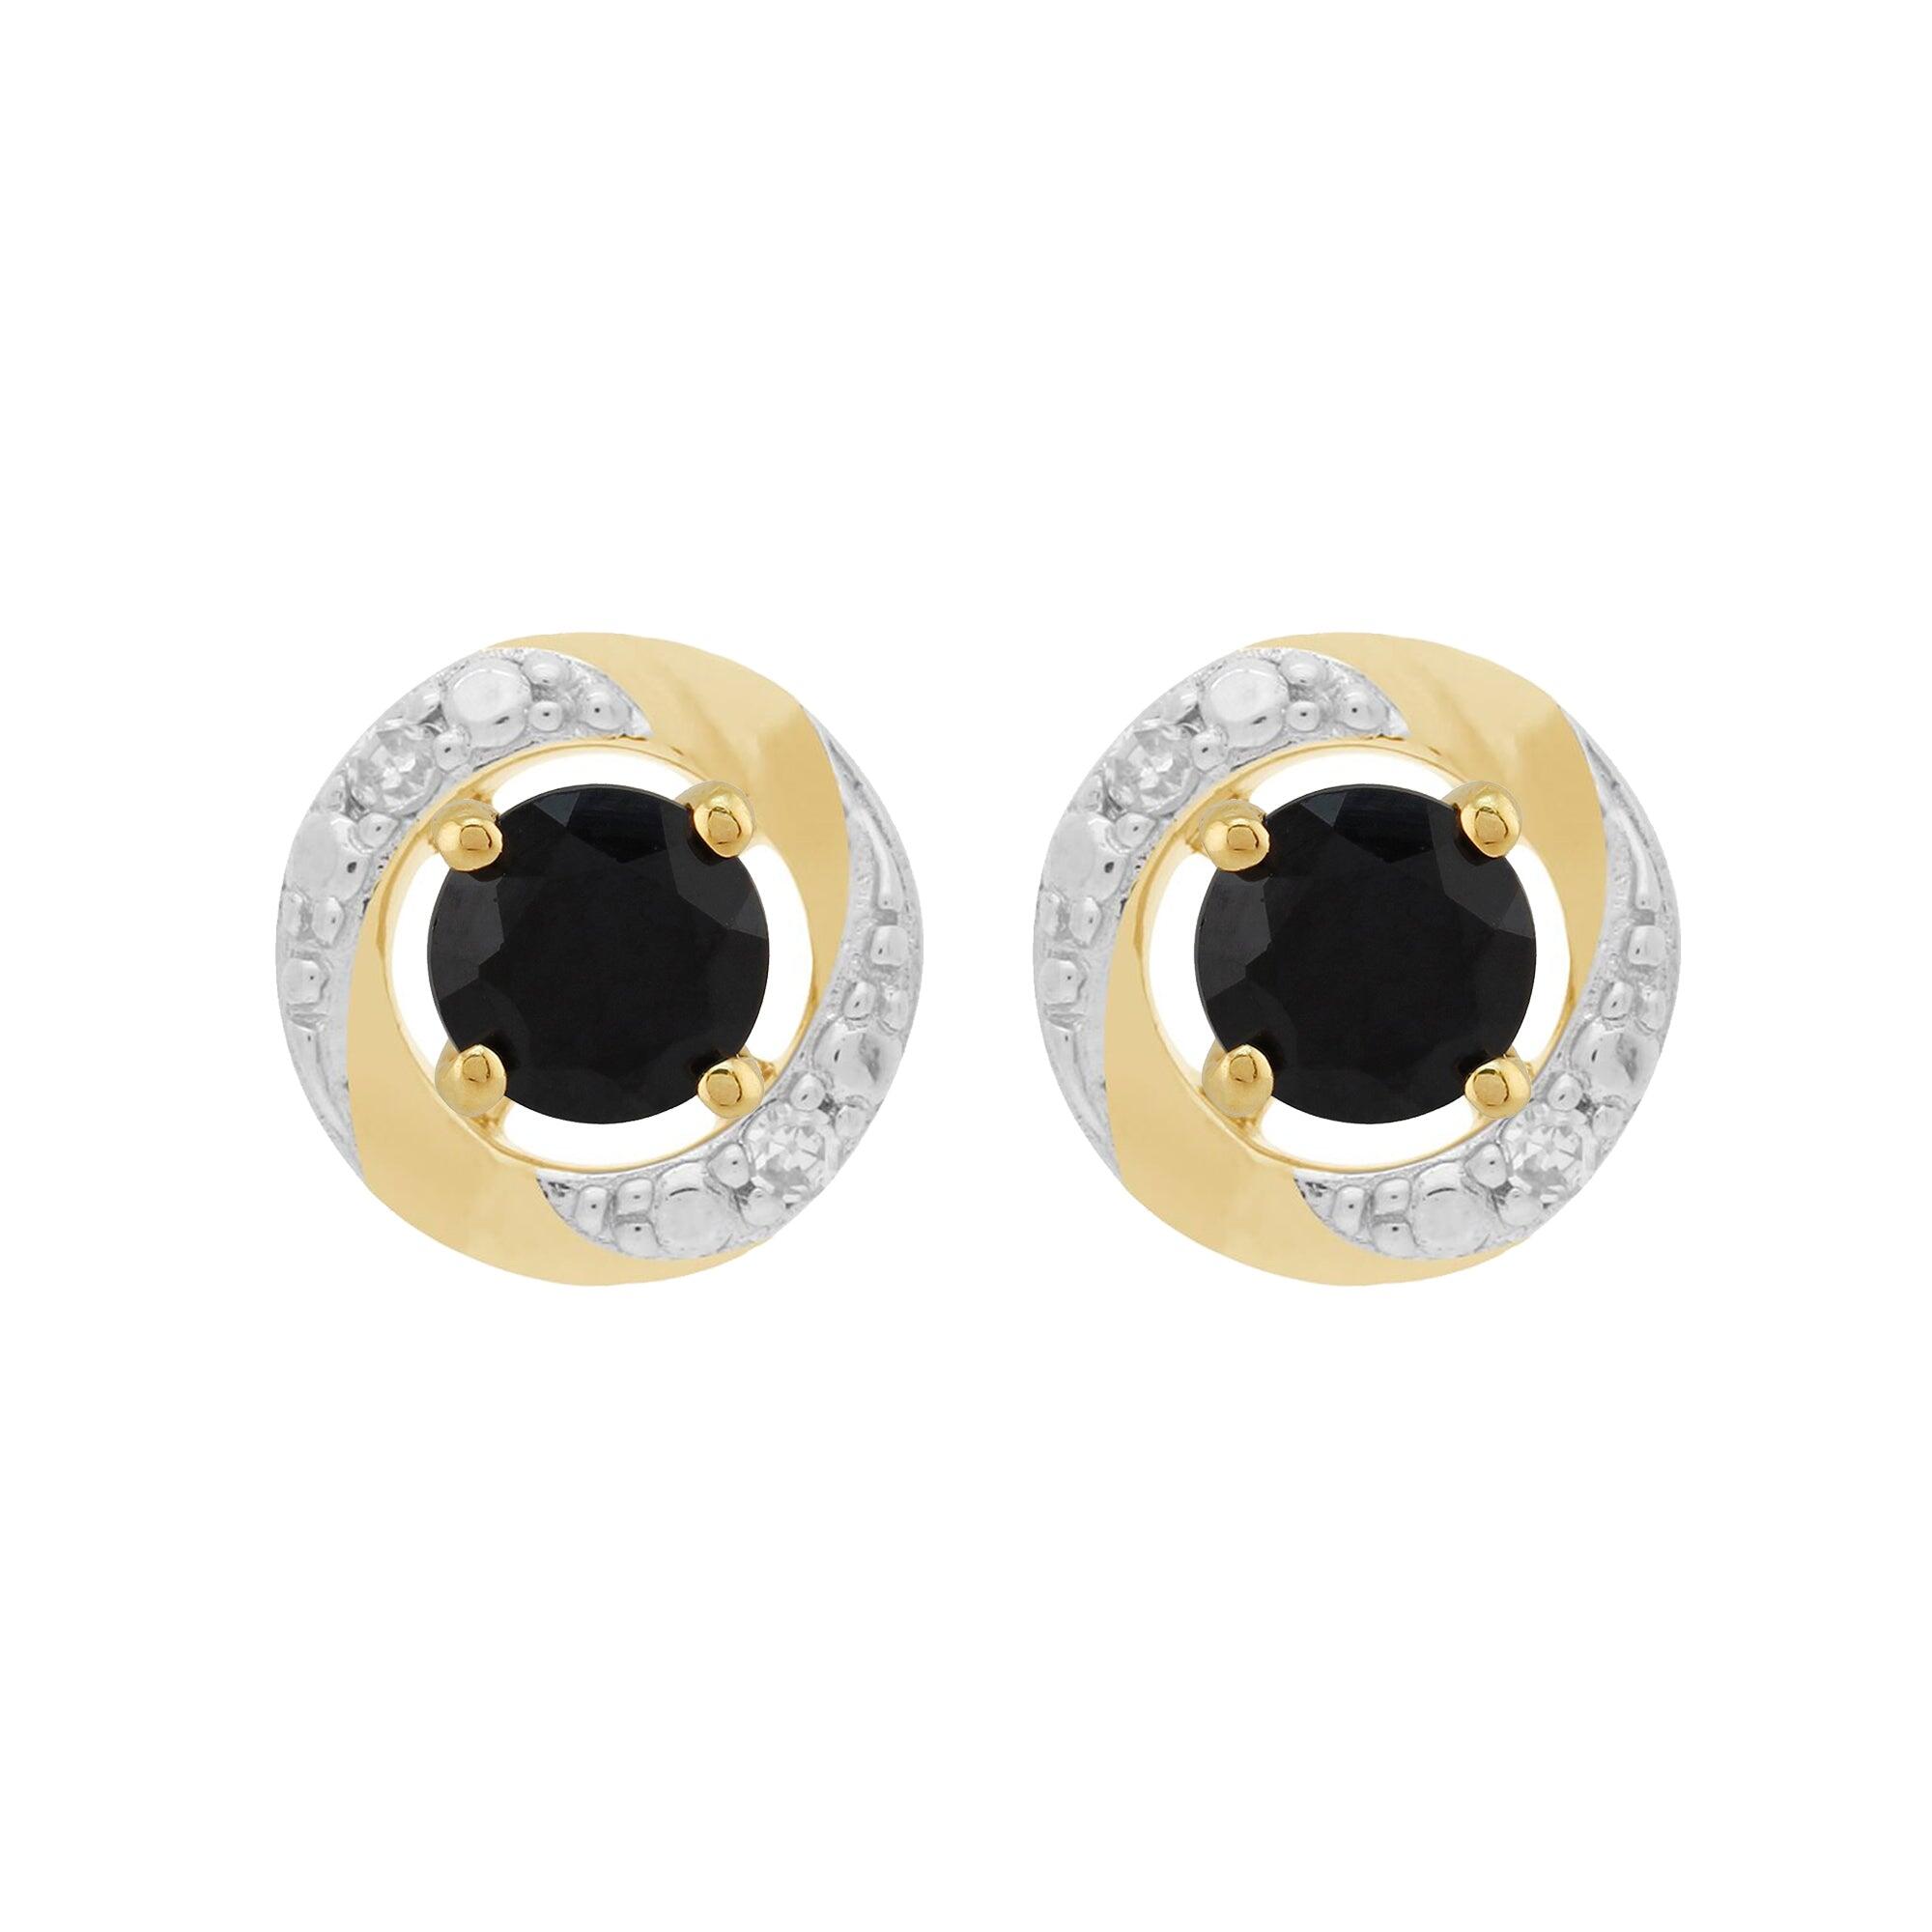 Classic Round Dark Blue Sapphire Studs with Detachable Diamond Halo Ear Jacket in 9ct Yellow Gold